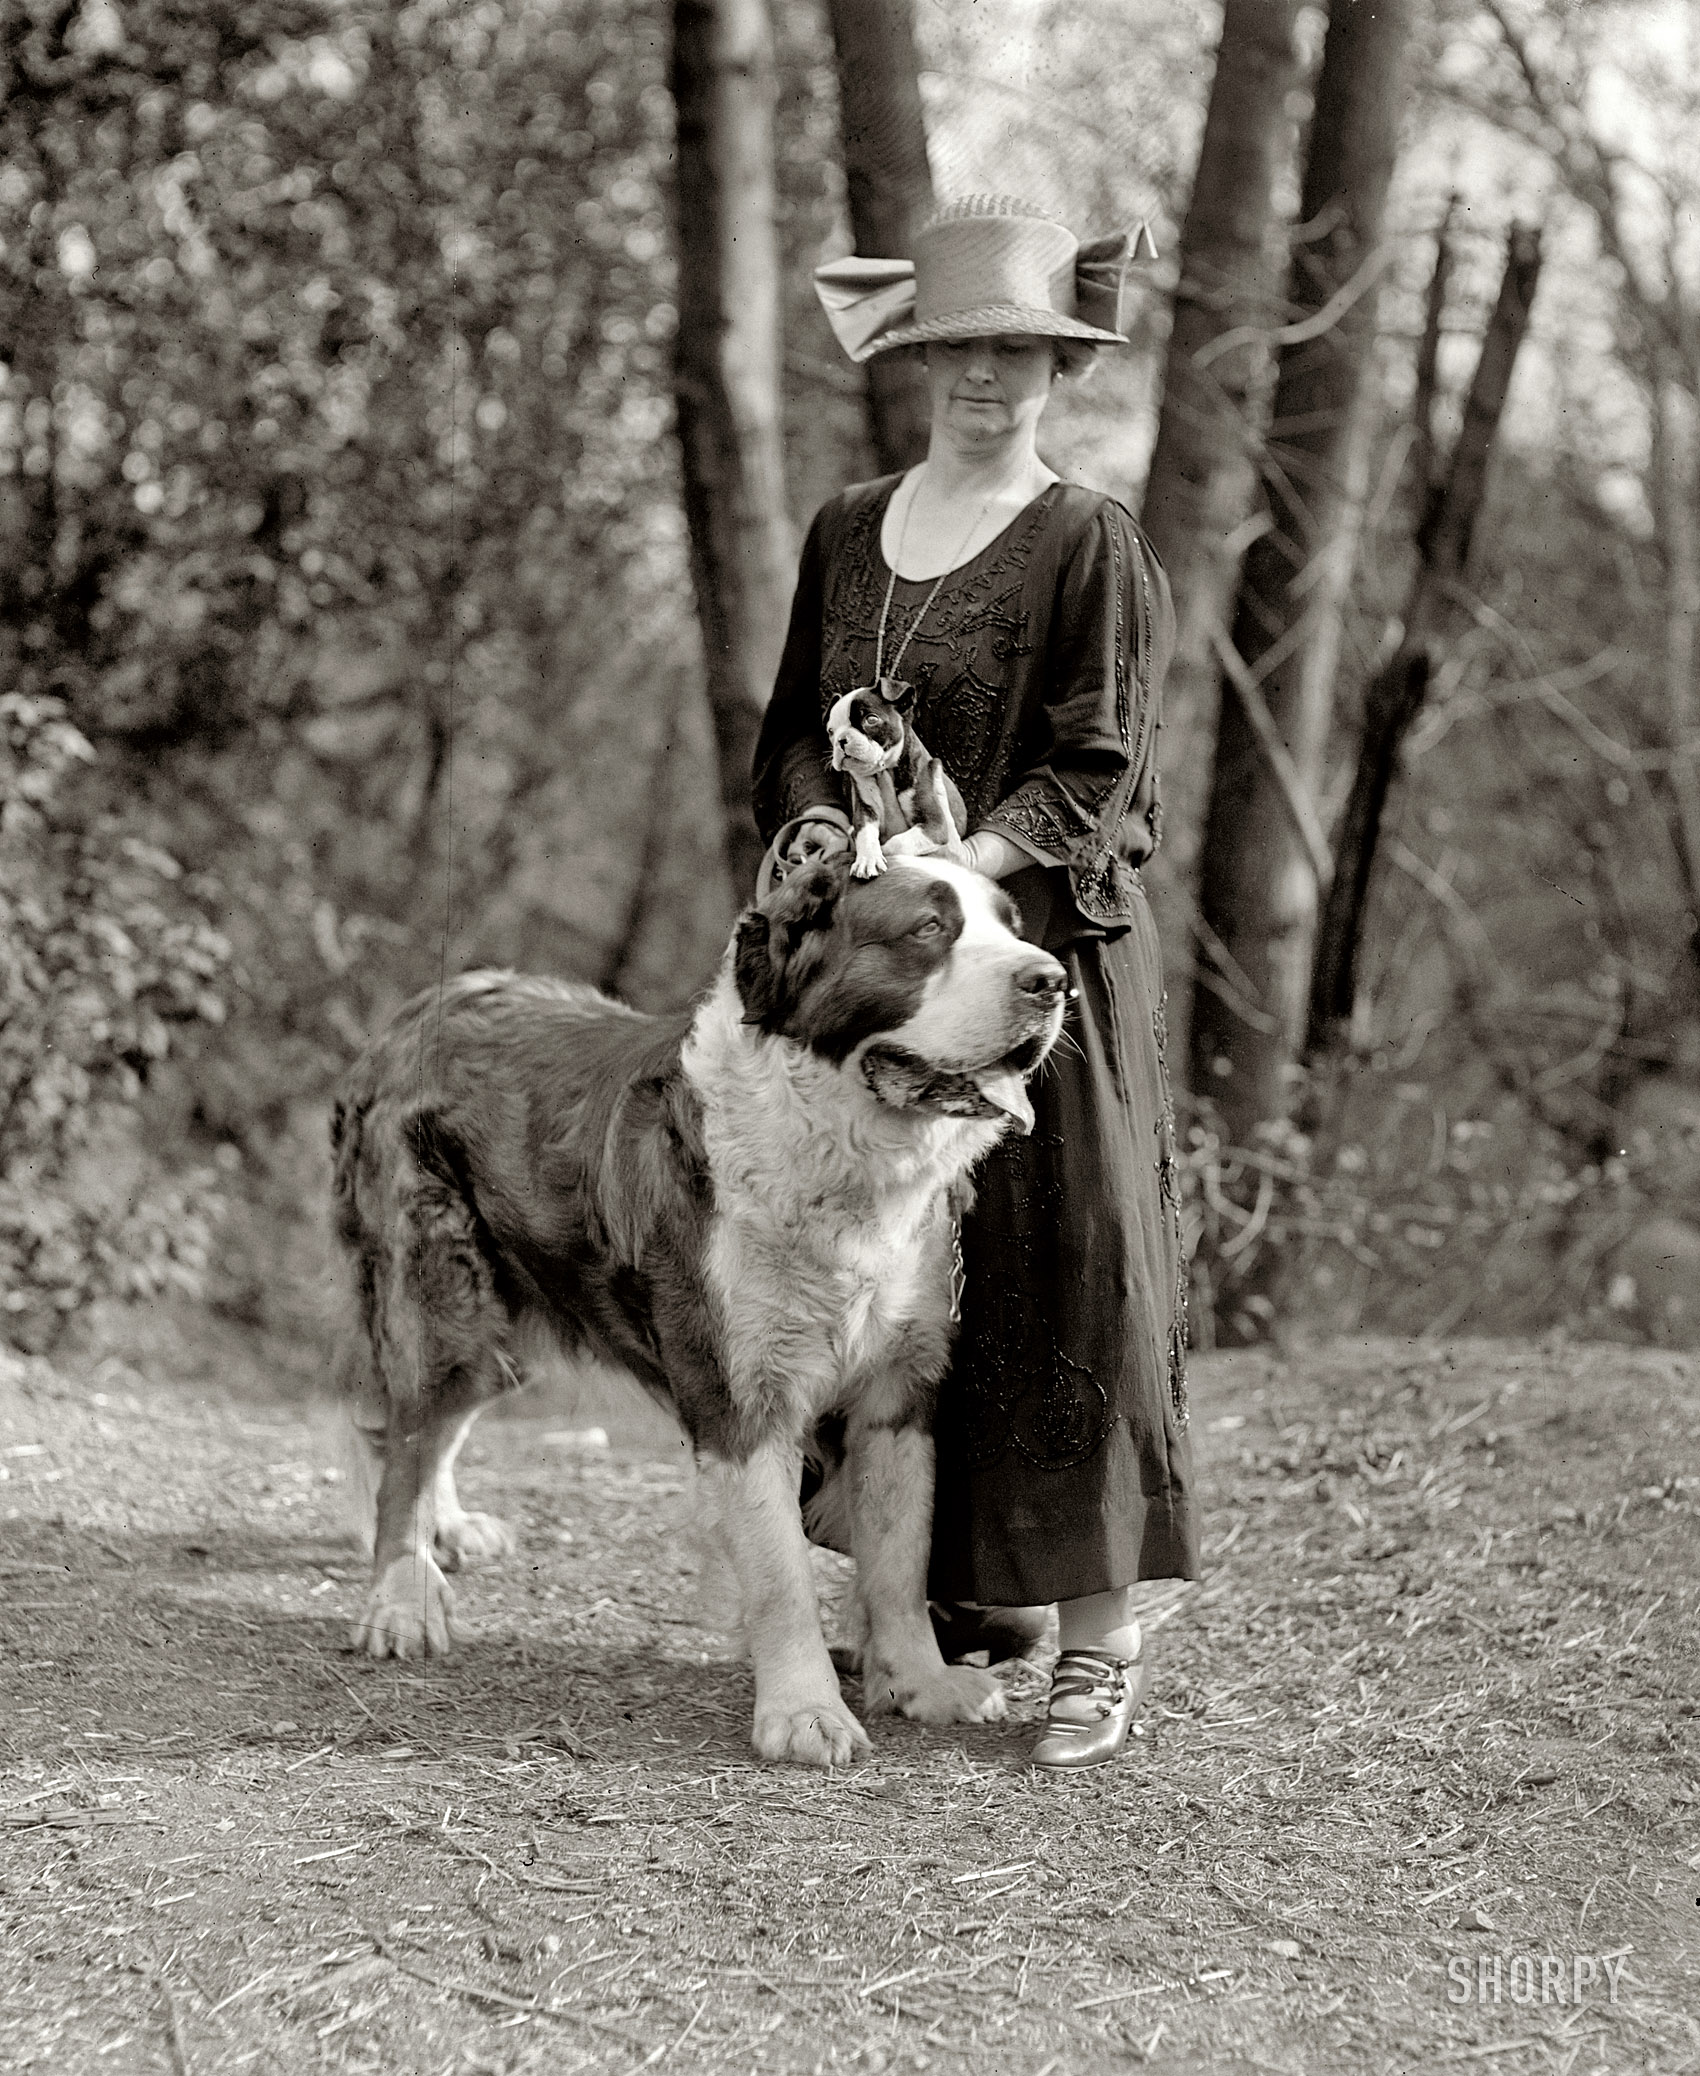 Washington, D.C., circa 1925. "Mrs. Marion Durphy with 'The Duke of Arlington.'" National Photo Company Collection glass negative. View full size.